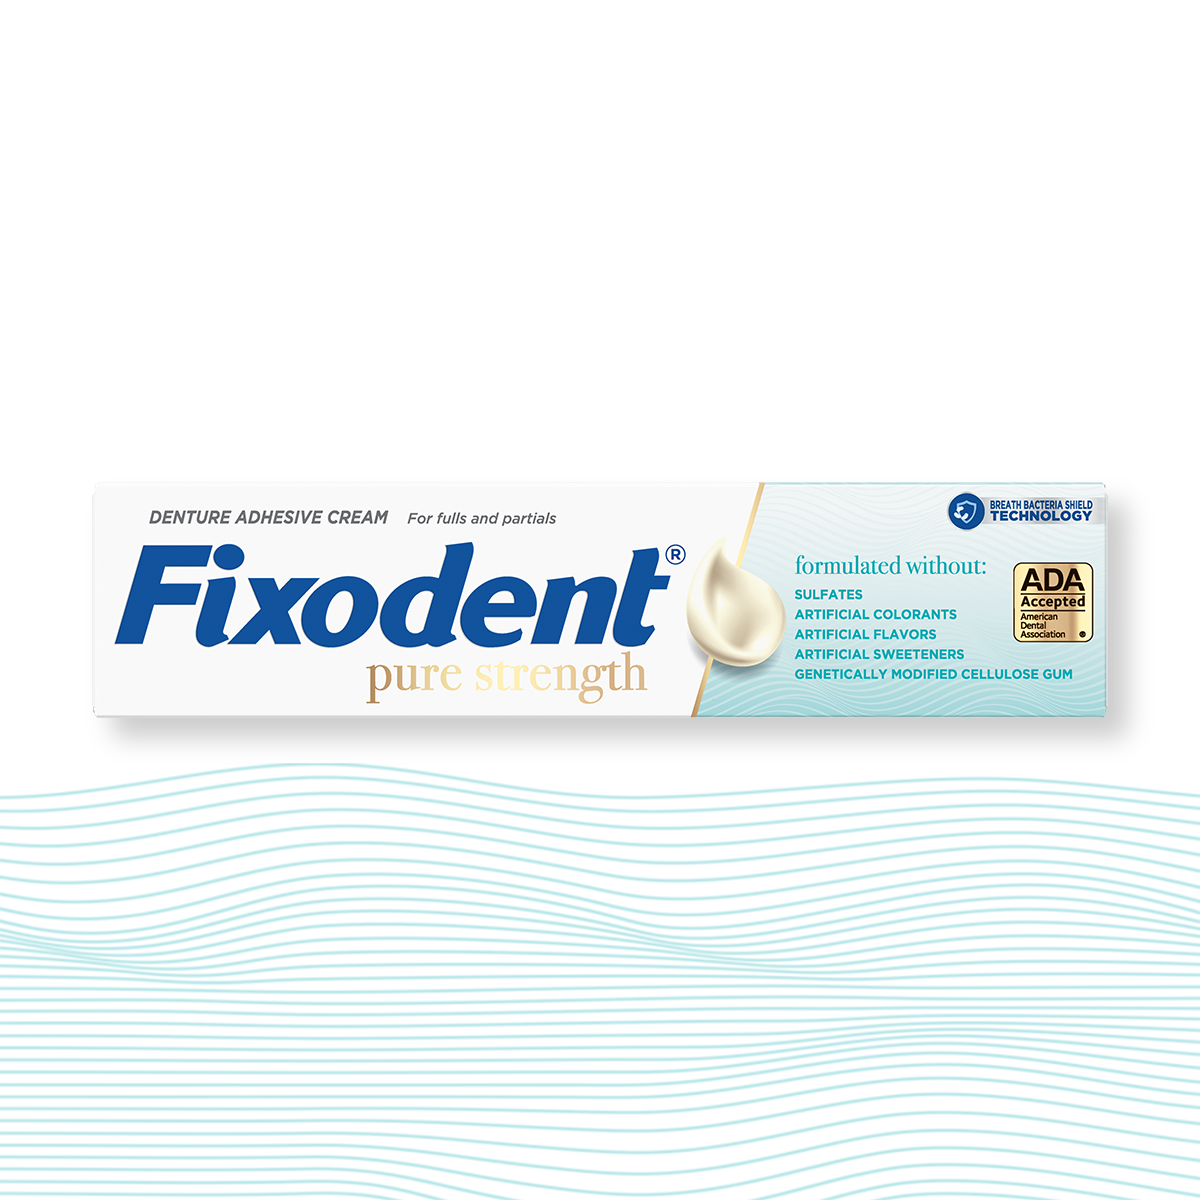 How to Apply Fixodent Denture Adhesive Correctly